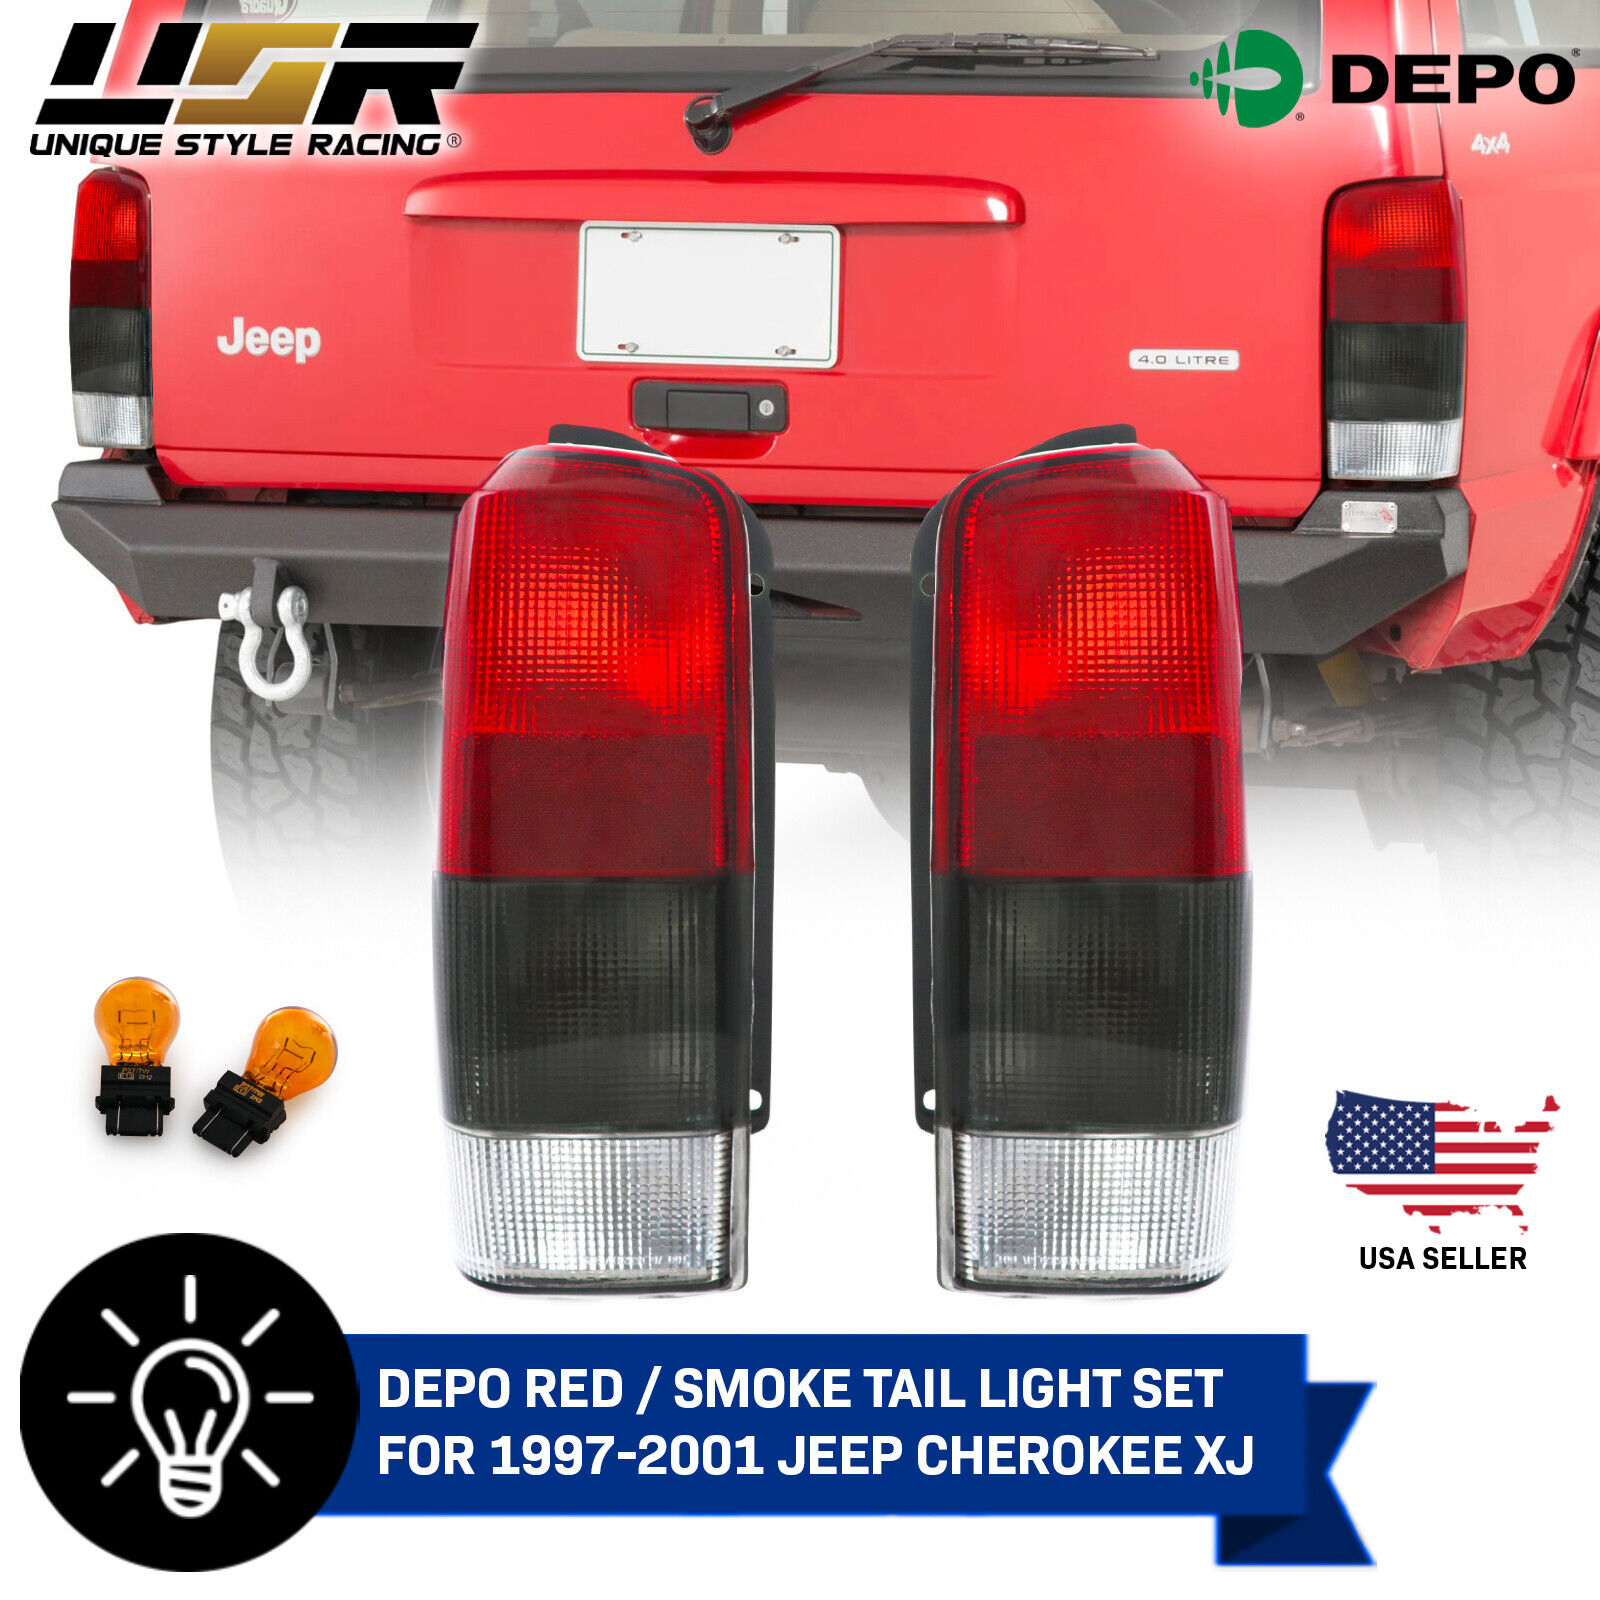 DEPO Pair of Red/Smoke Rear Tail Lights For 1997-2001 Jeep Cherokee XJ